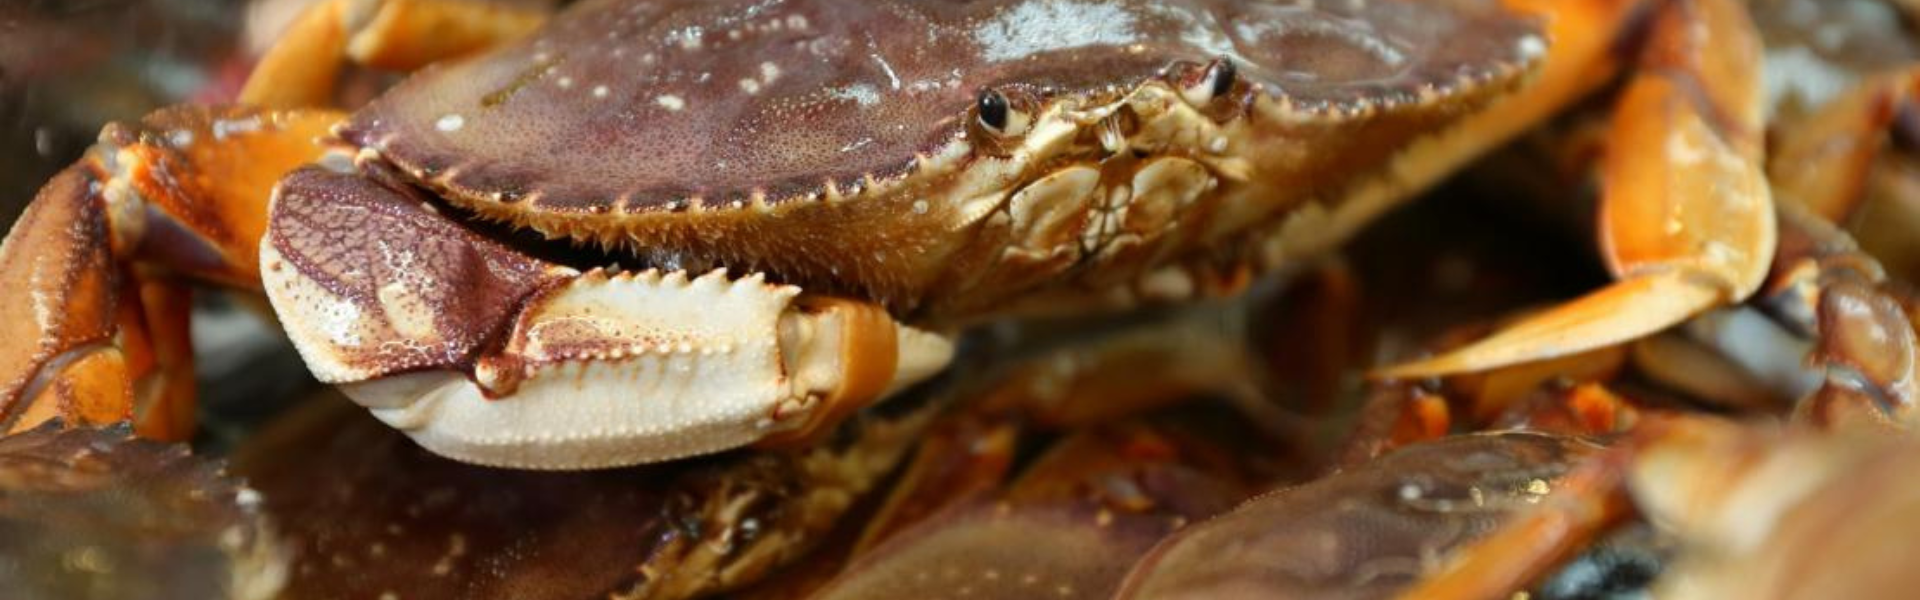 Ocean acidification might be causing marine crabs to lose their sense of smell according to a new U of T Scarborough new study